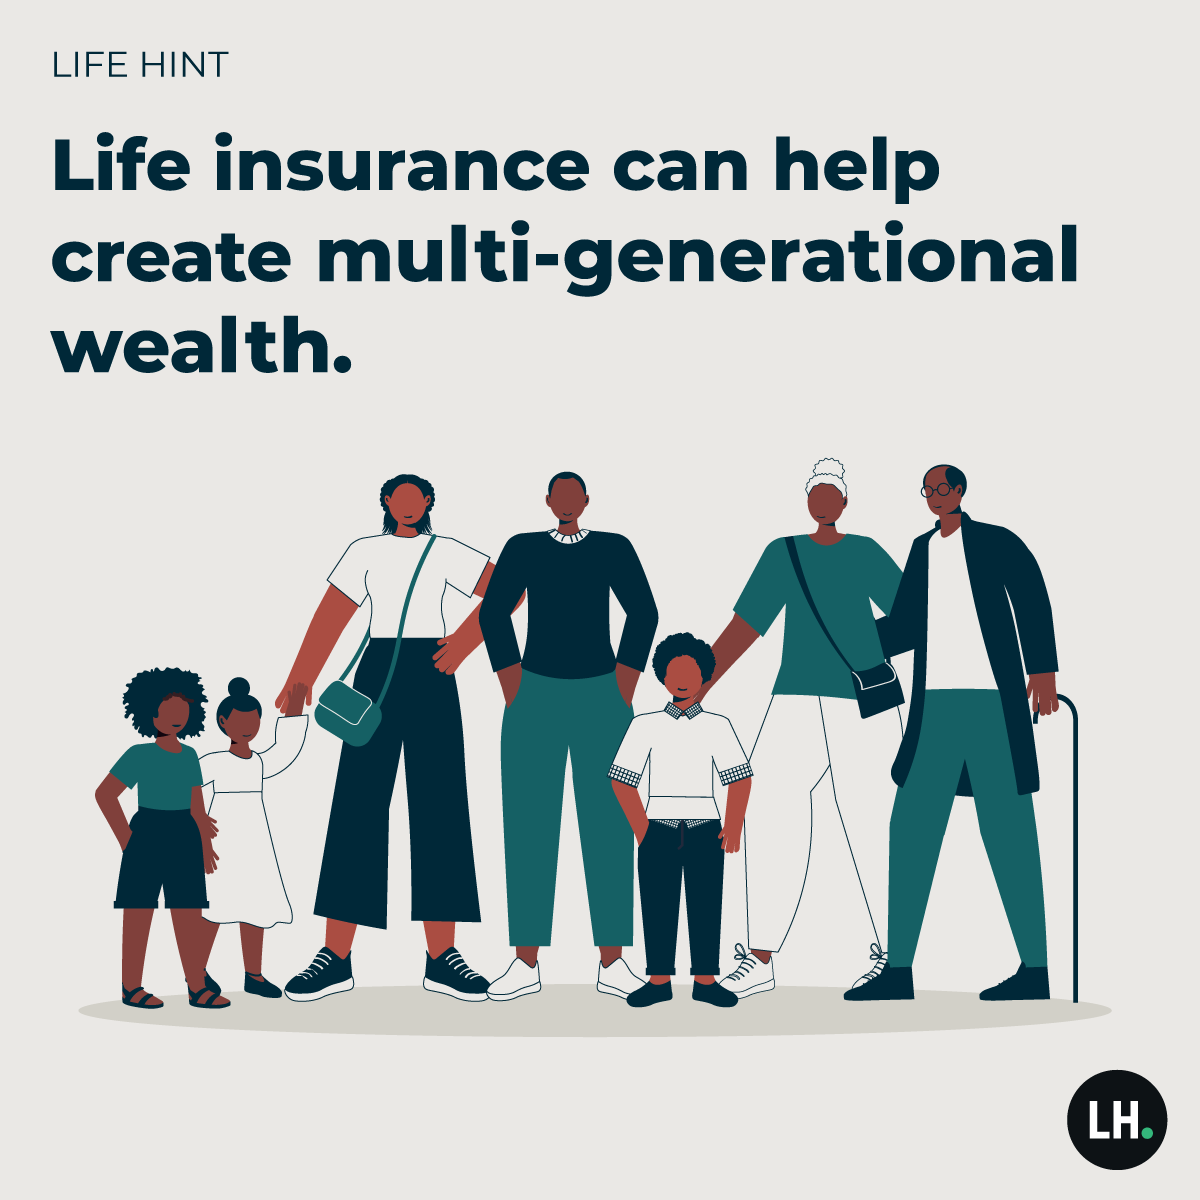 With life insurance, I've got you.